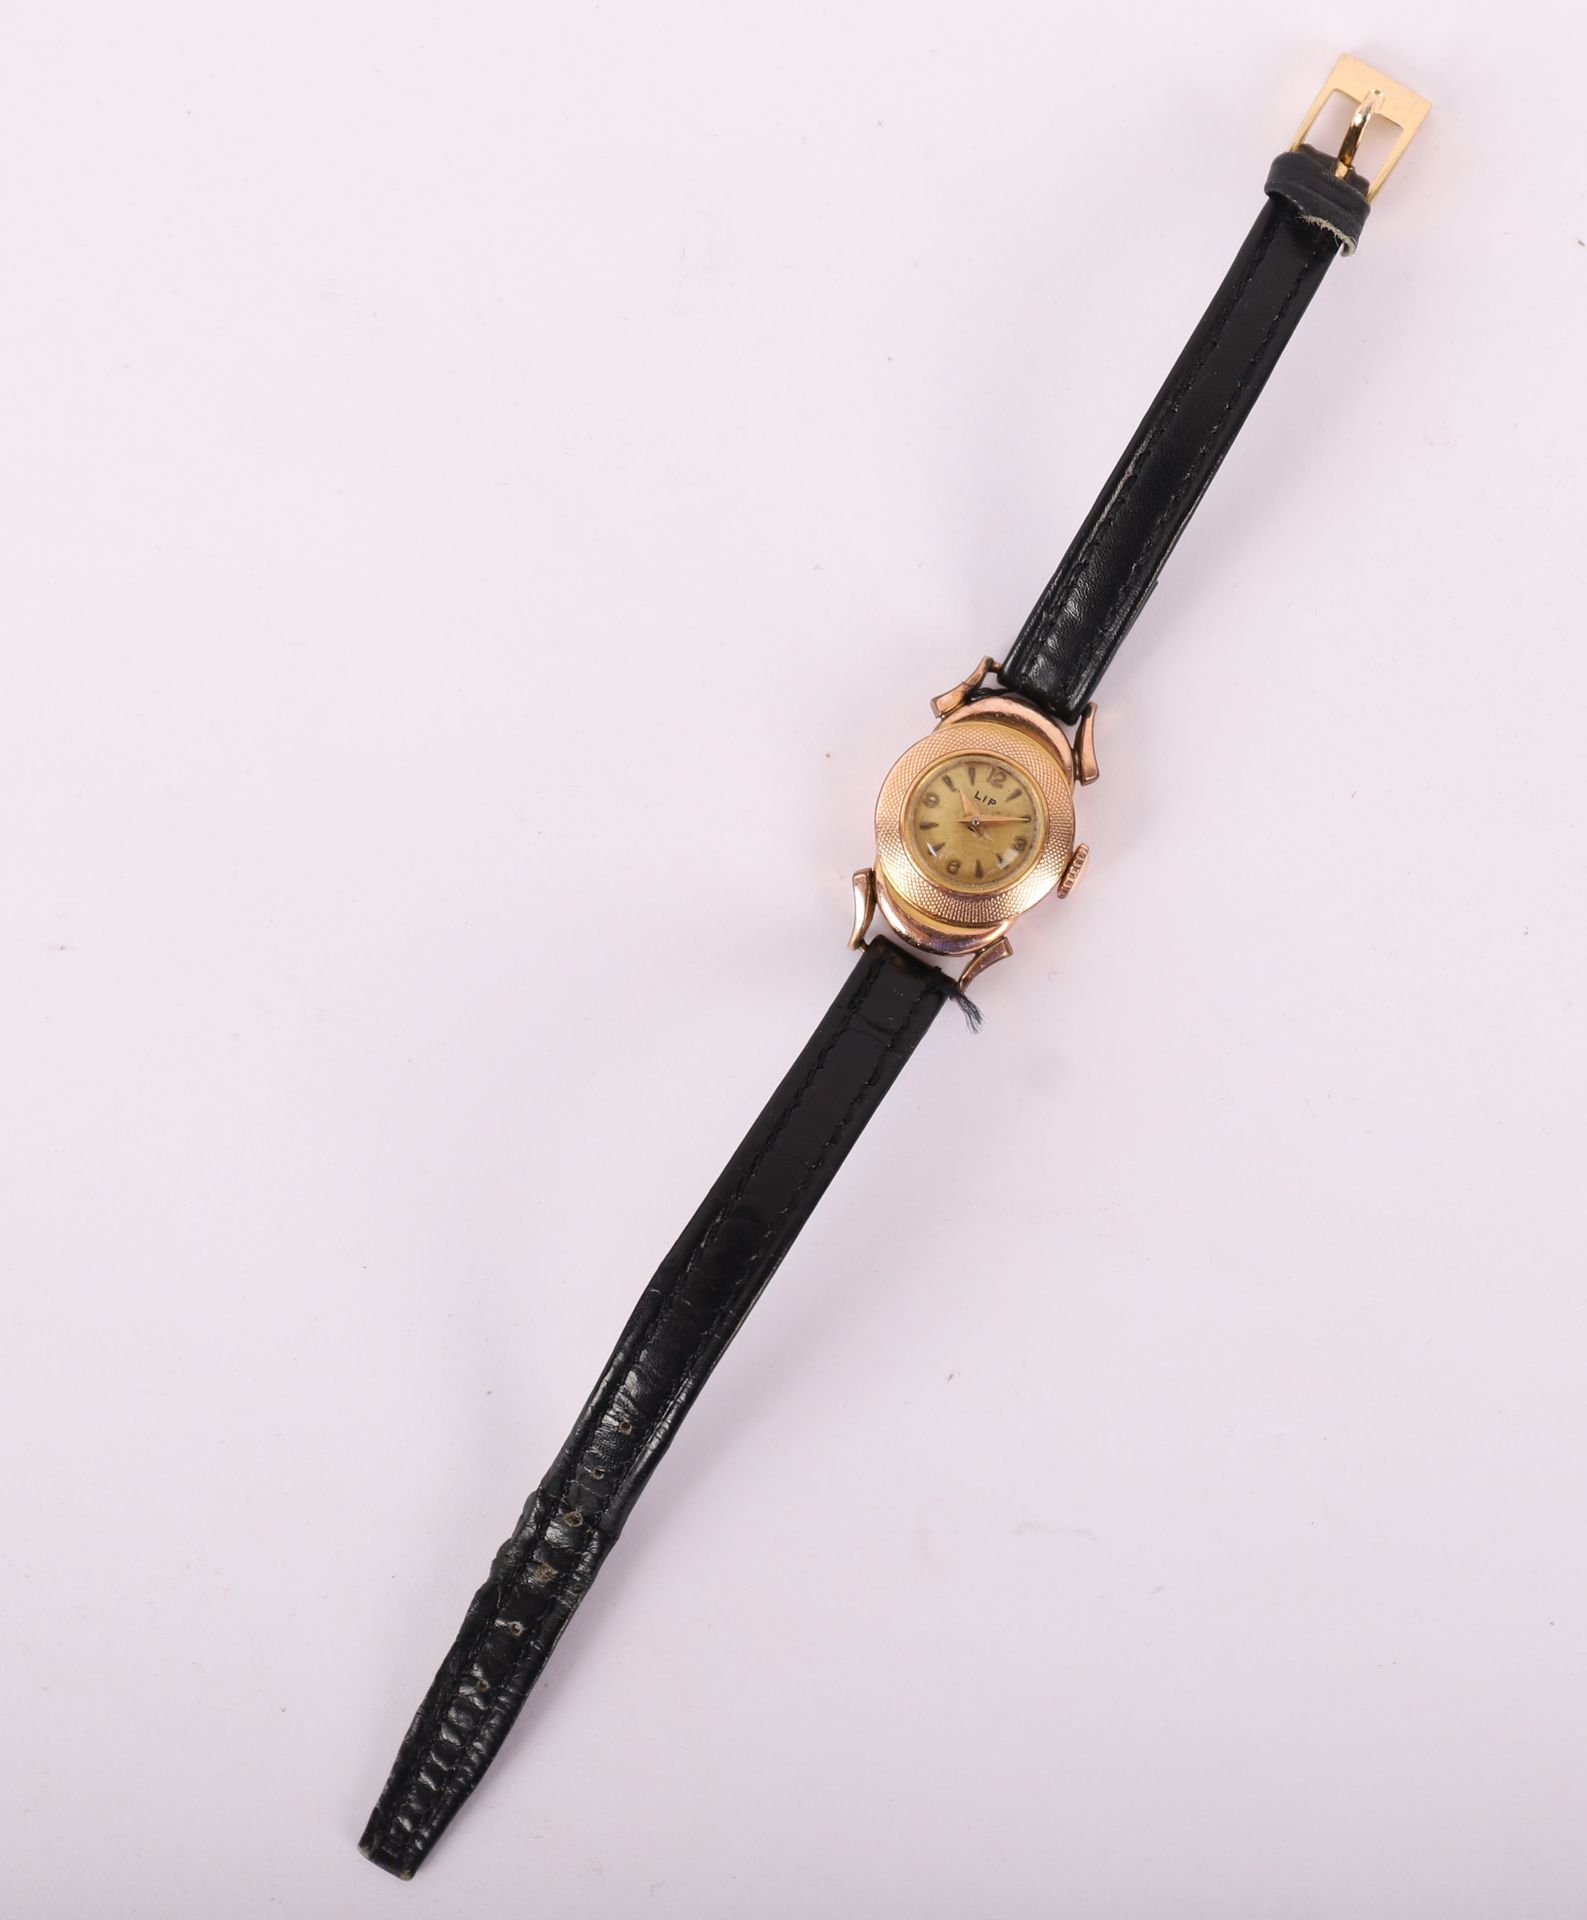 Lip LADY'S WATCH LIP IN GOLD PLATED
Black leather strap
Worn